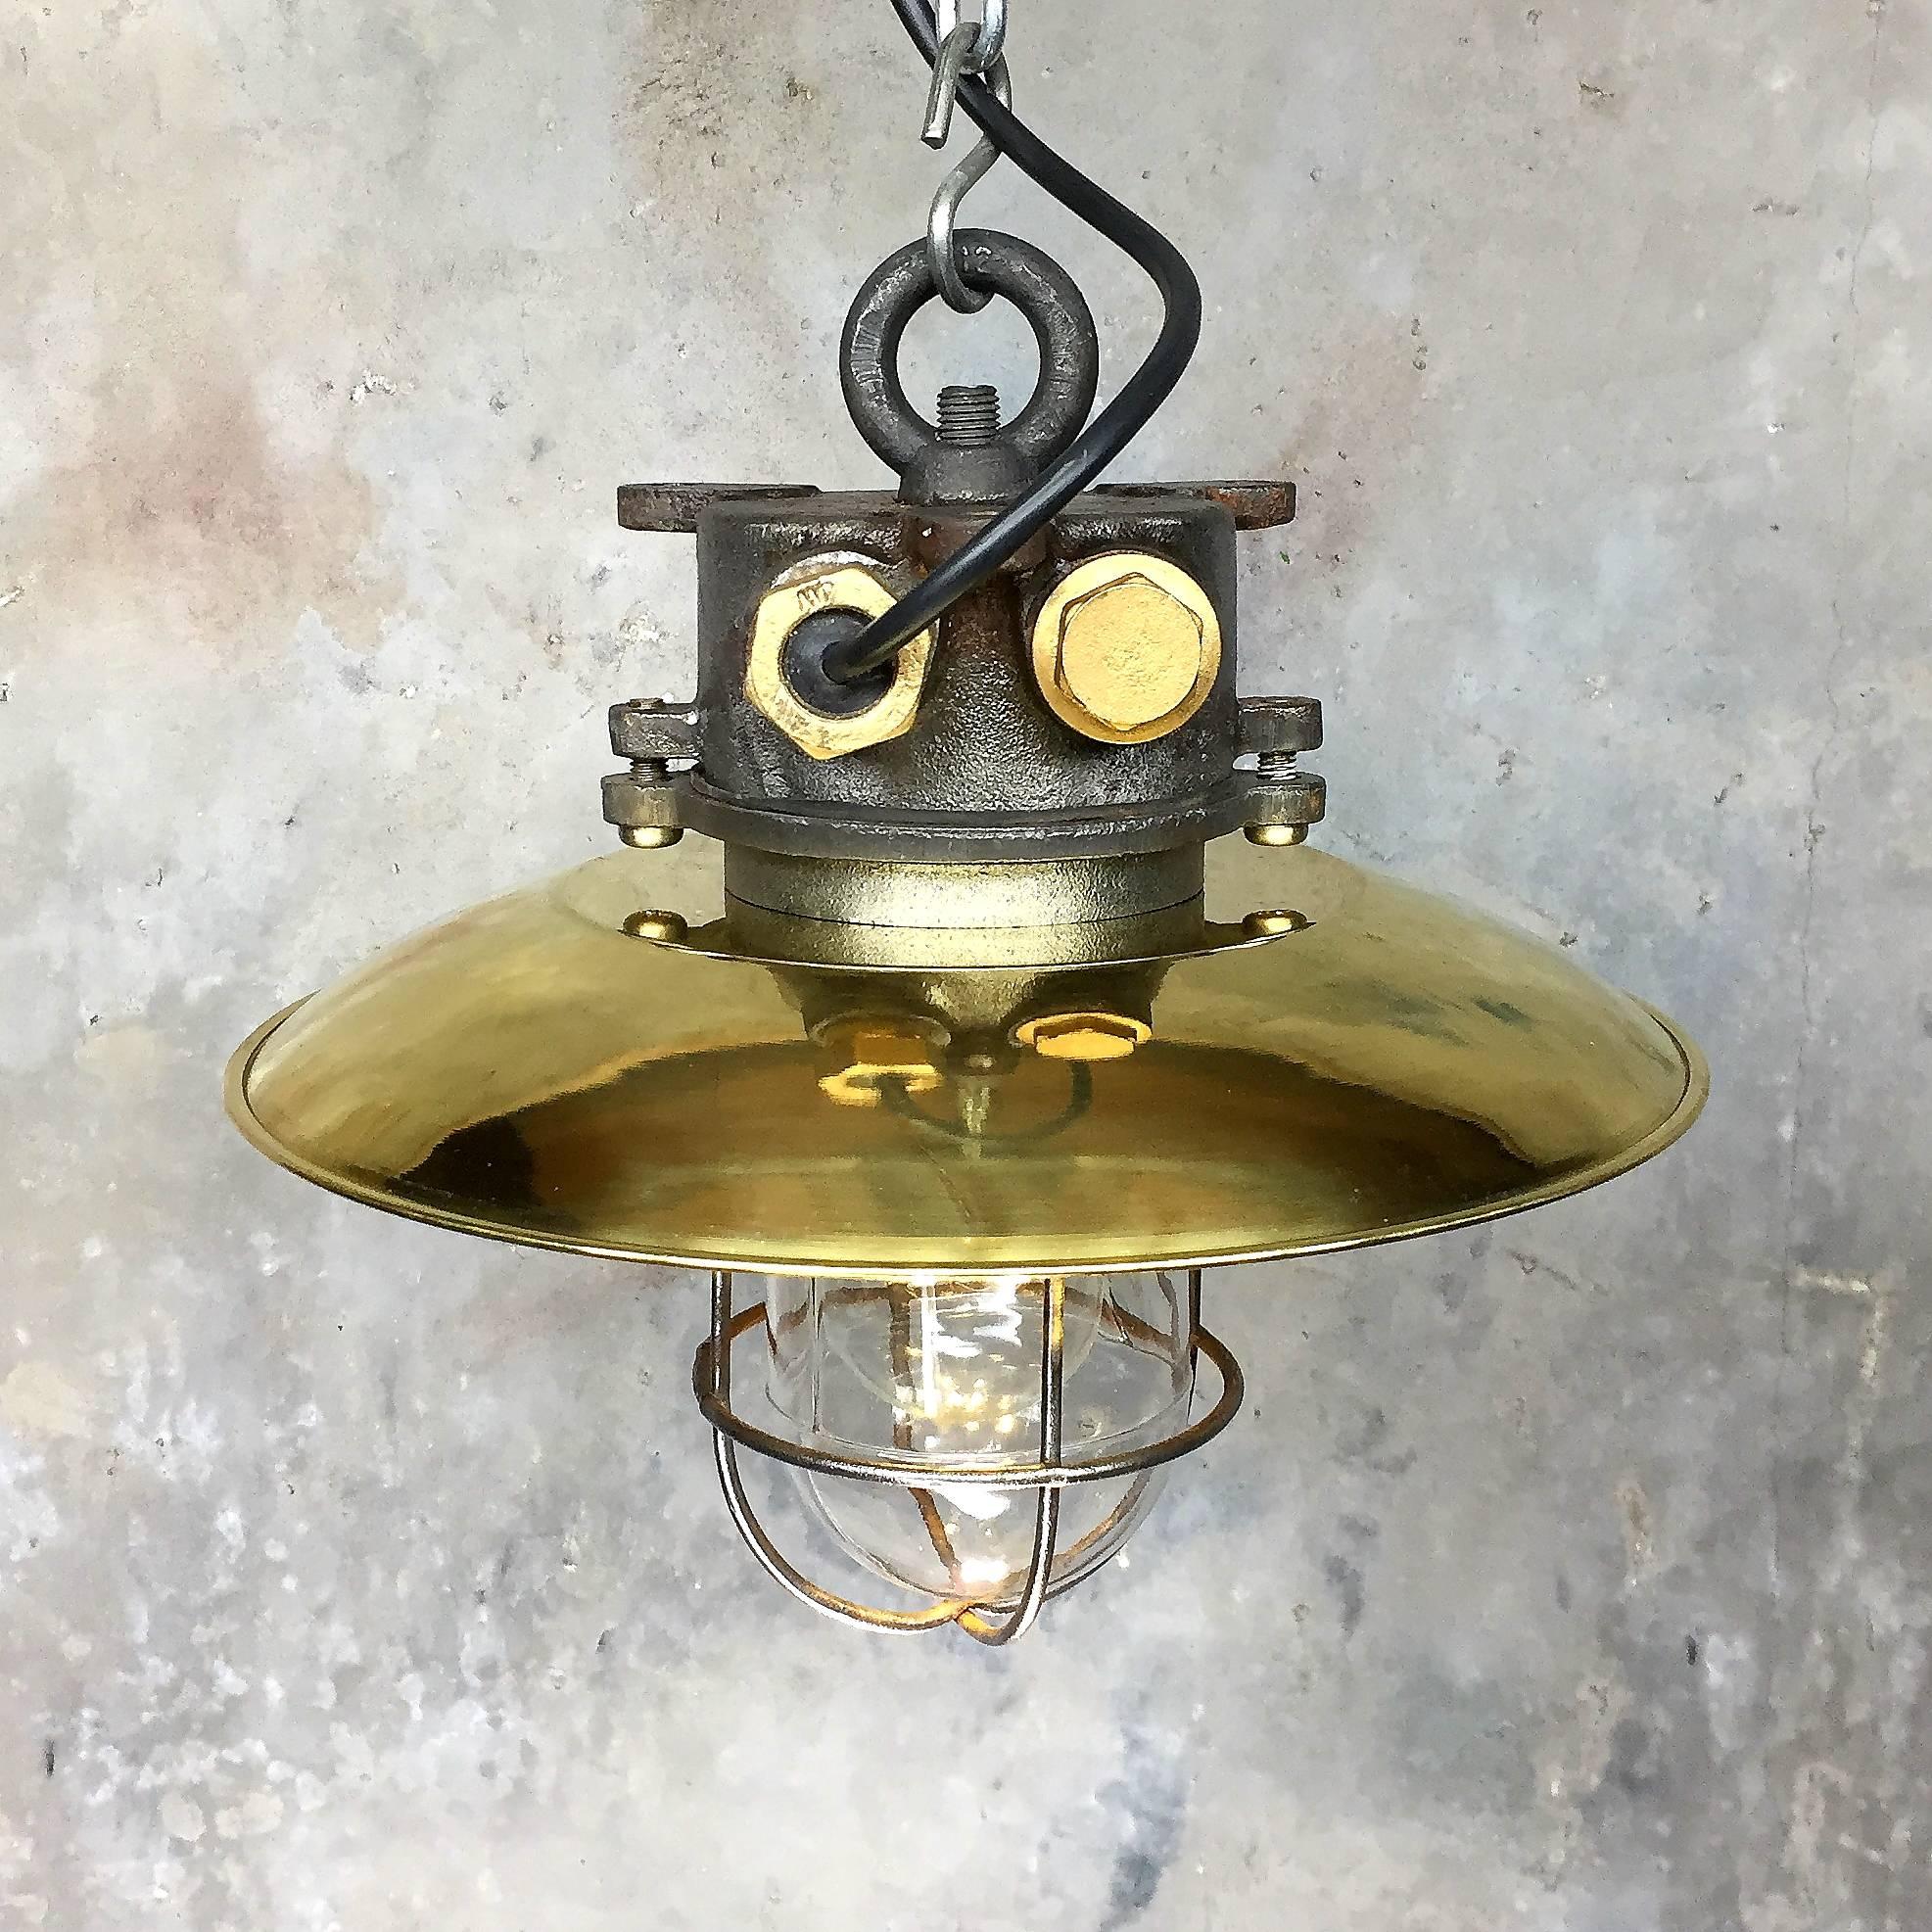 Late Century Iron, Brass and Glass Explosion Proof Industrial Pendant In Excellent Condition For Sale In Leicester, Leicestershire